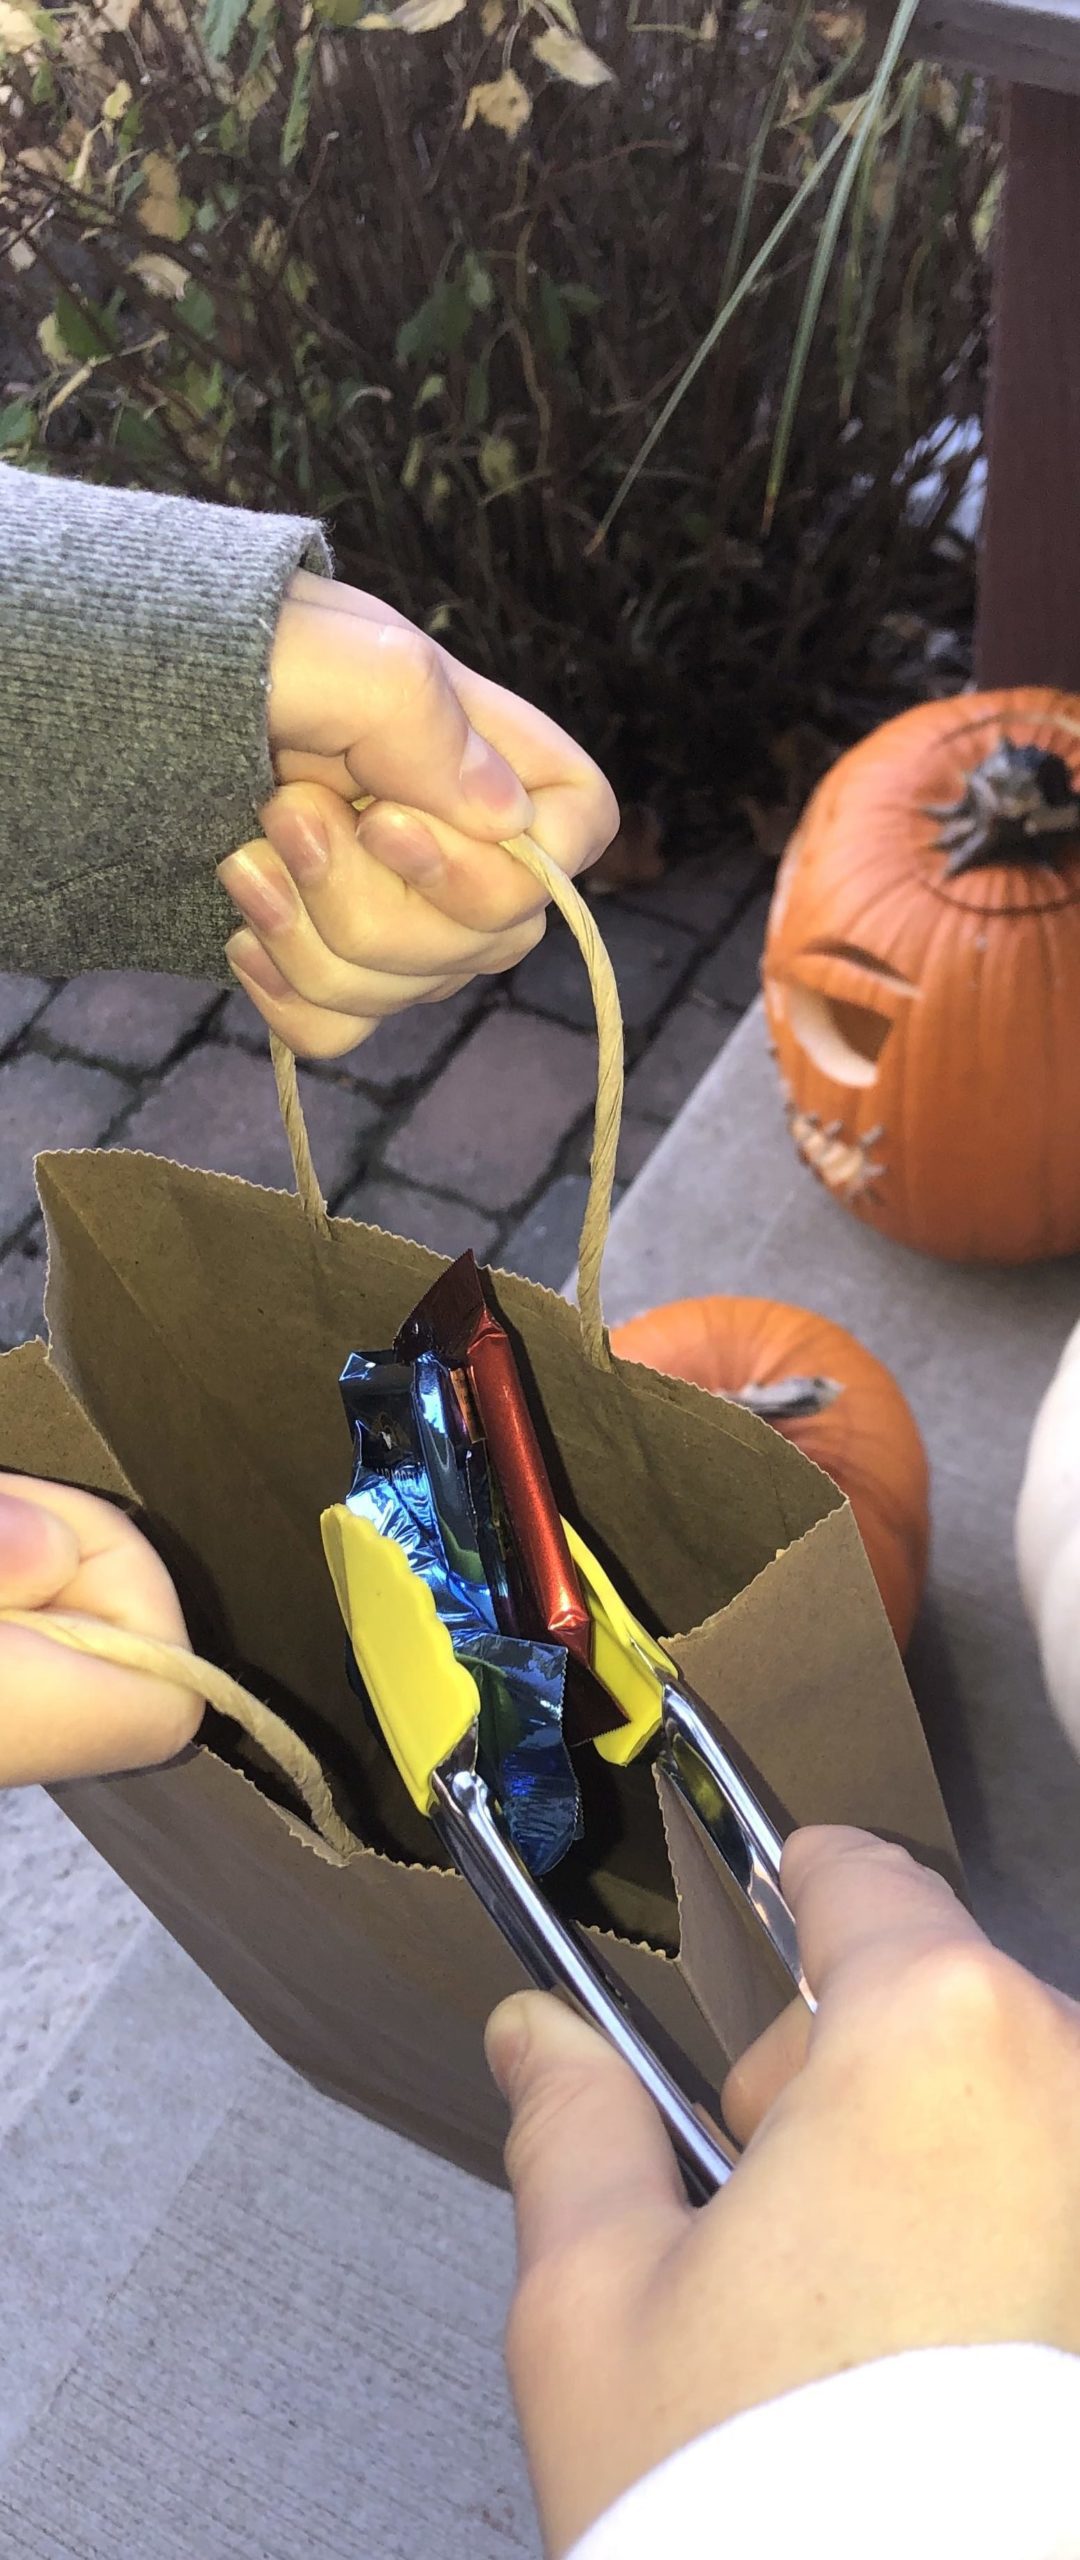 A safe form of handing out candy by using tongs.